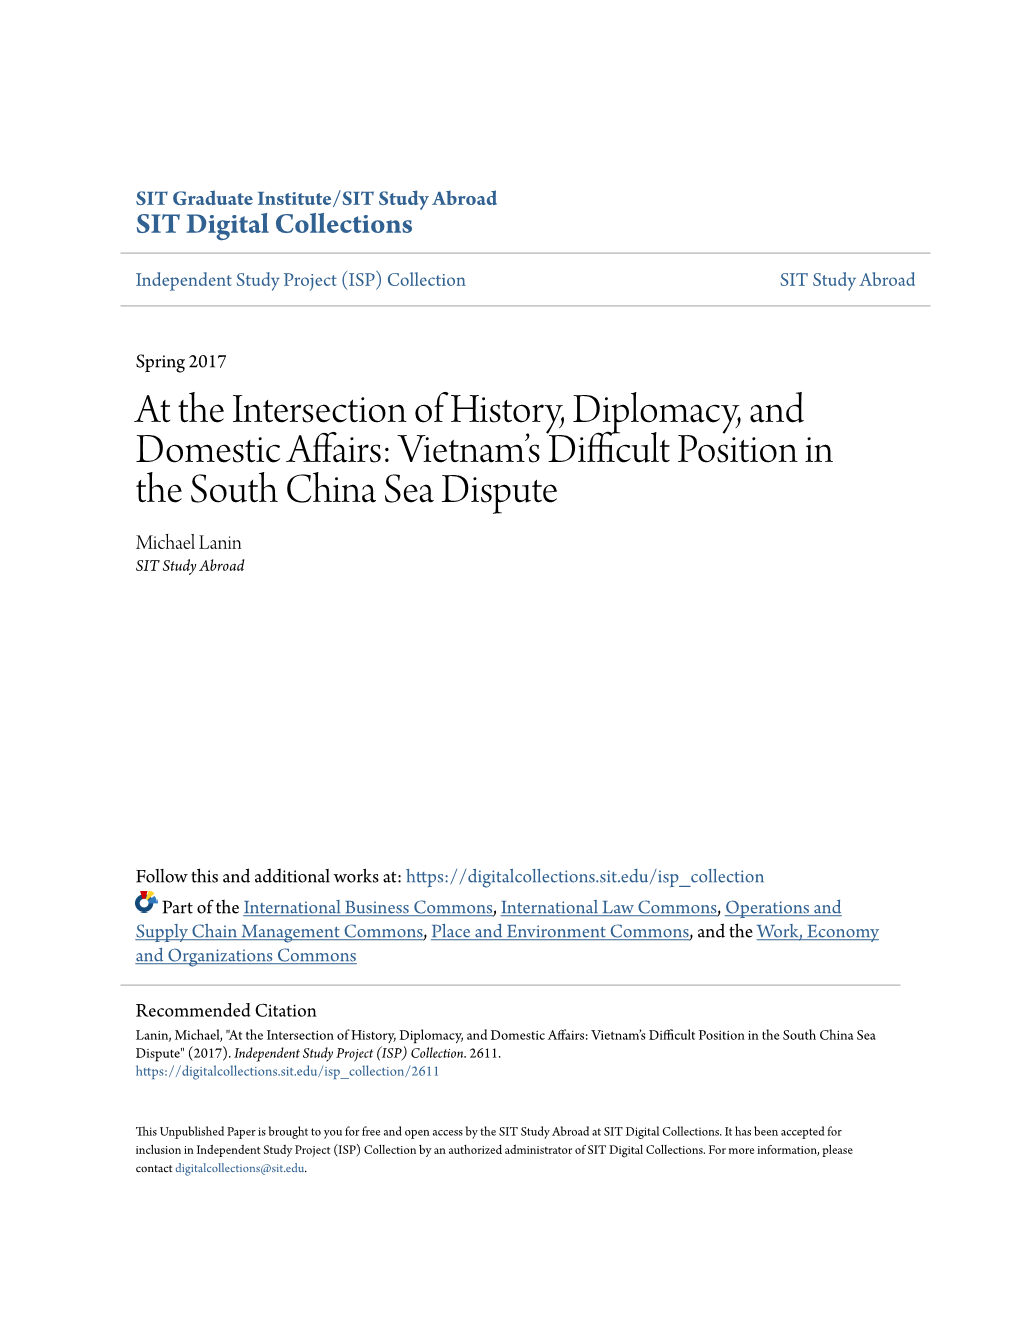 Vietnam's Difficult Position in the South